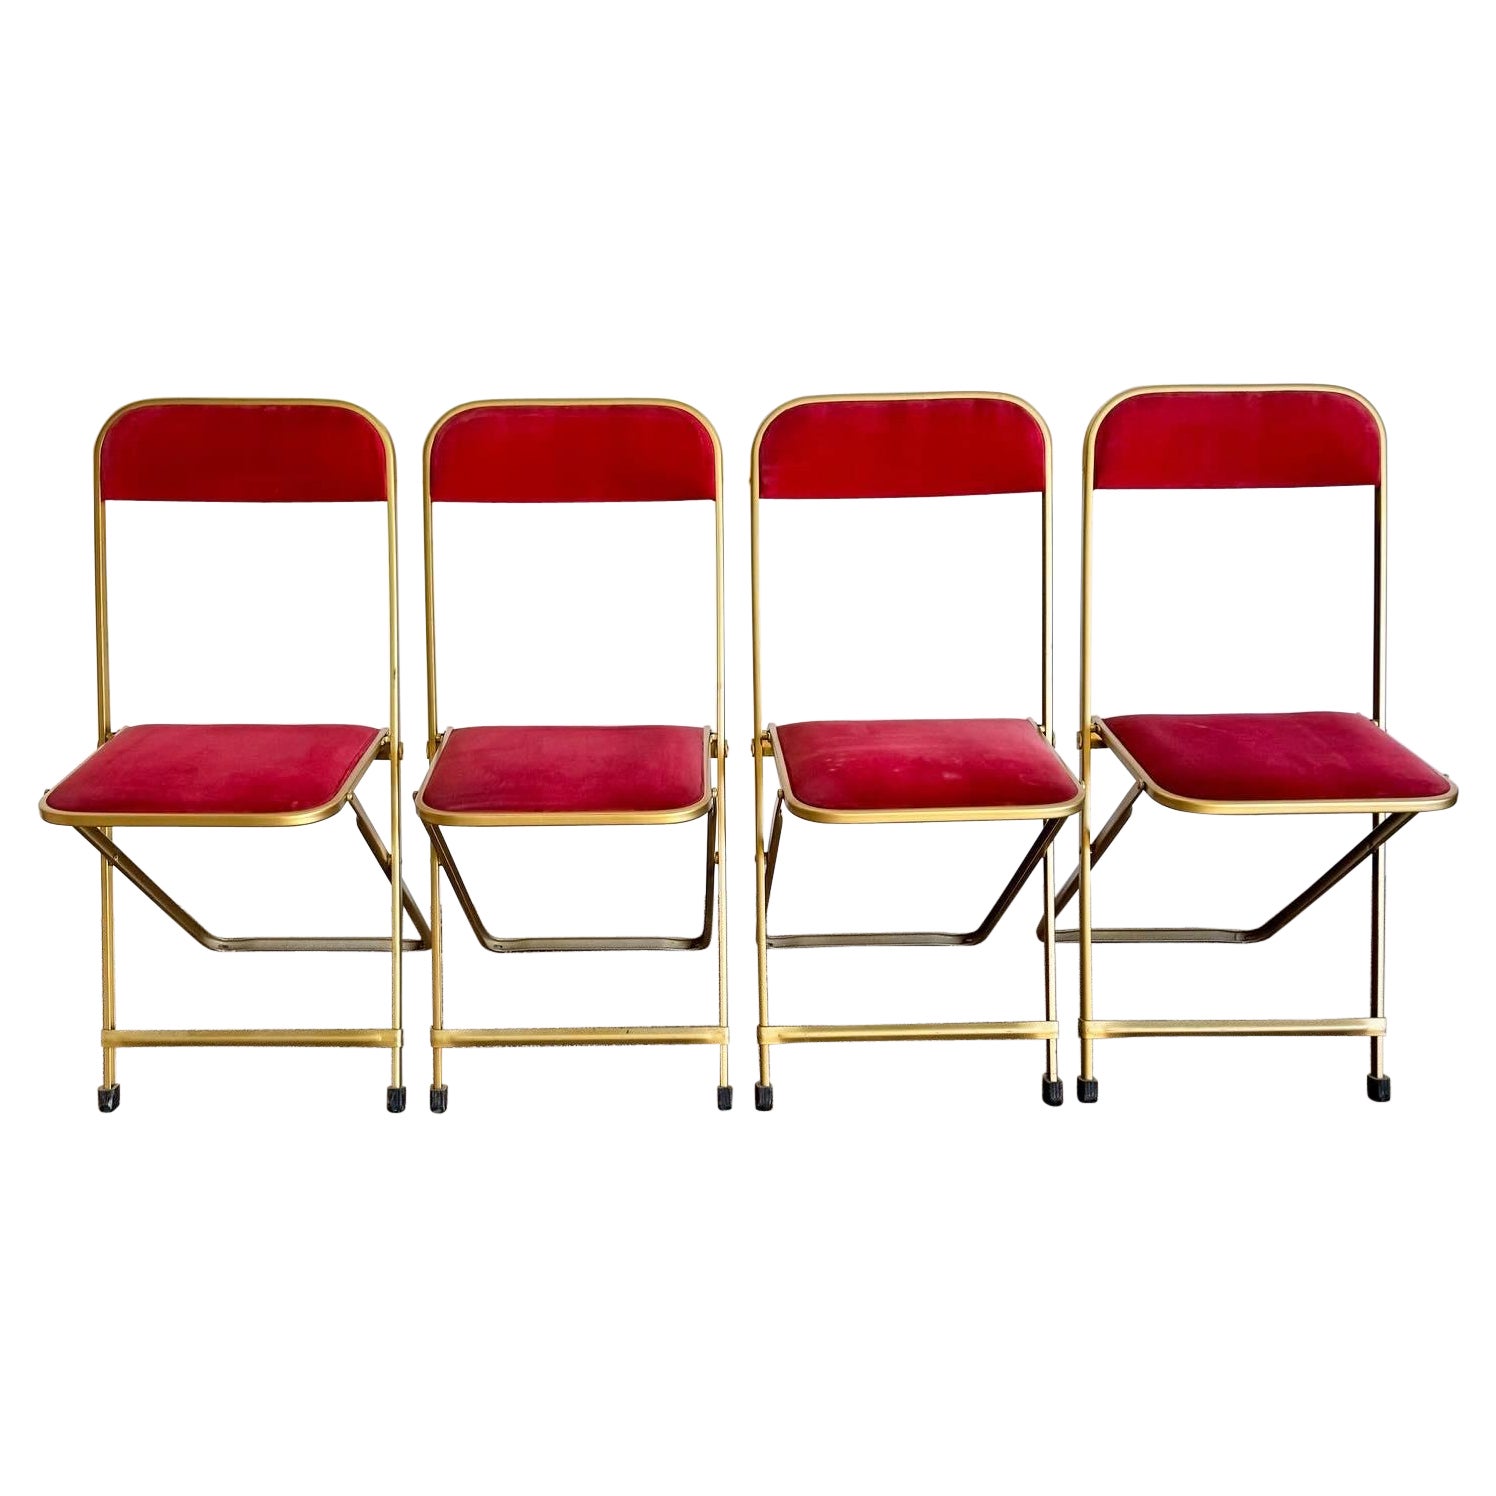 Vintage Gold and Red Folding Chairs by A. Fritz and Co - Set of 4